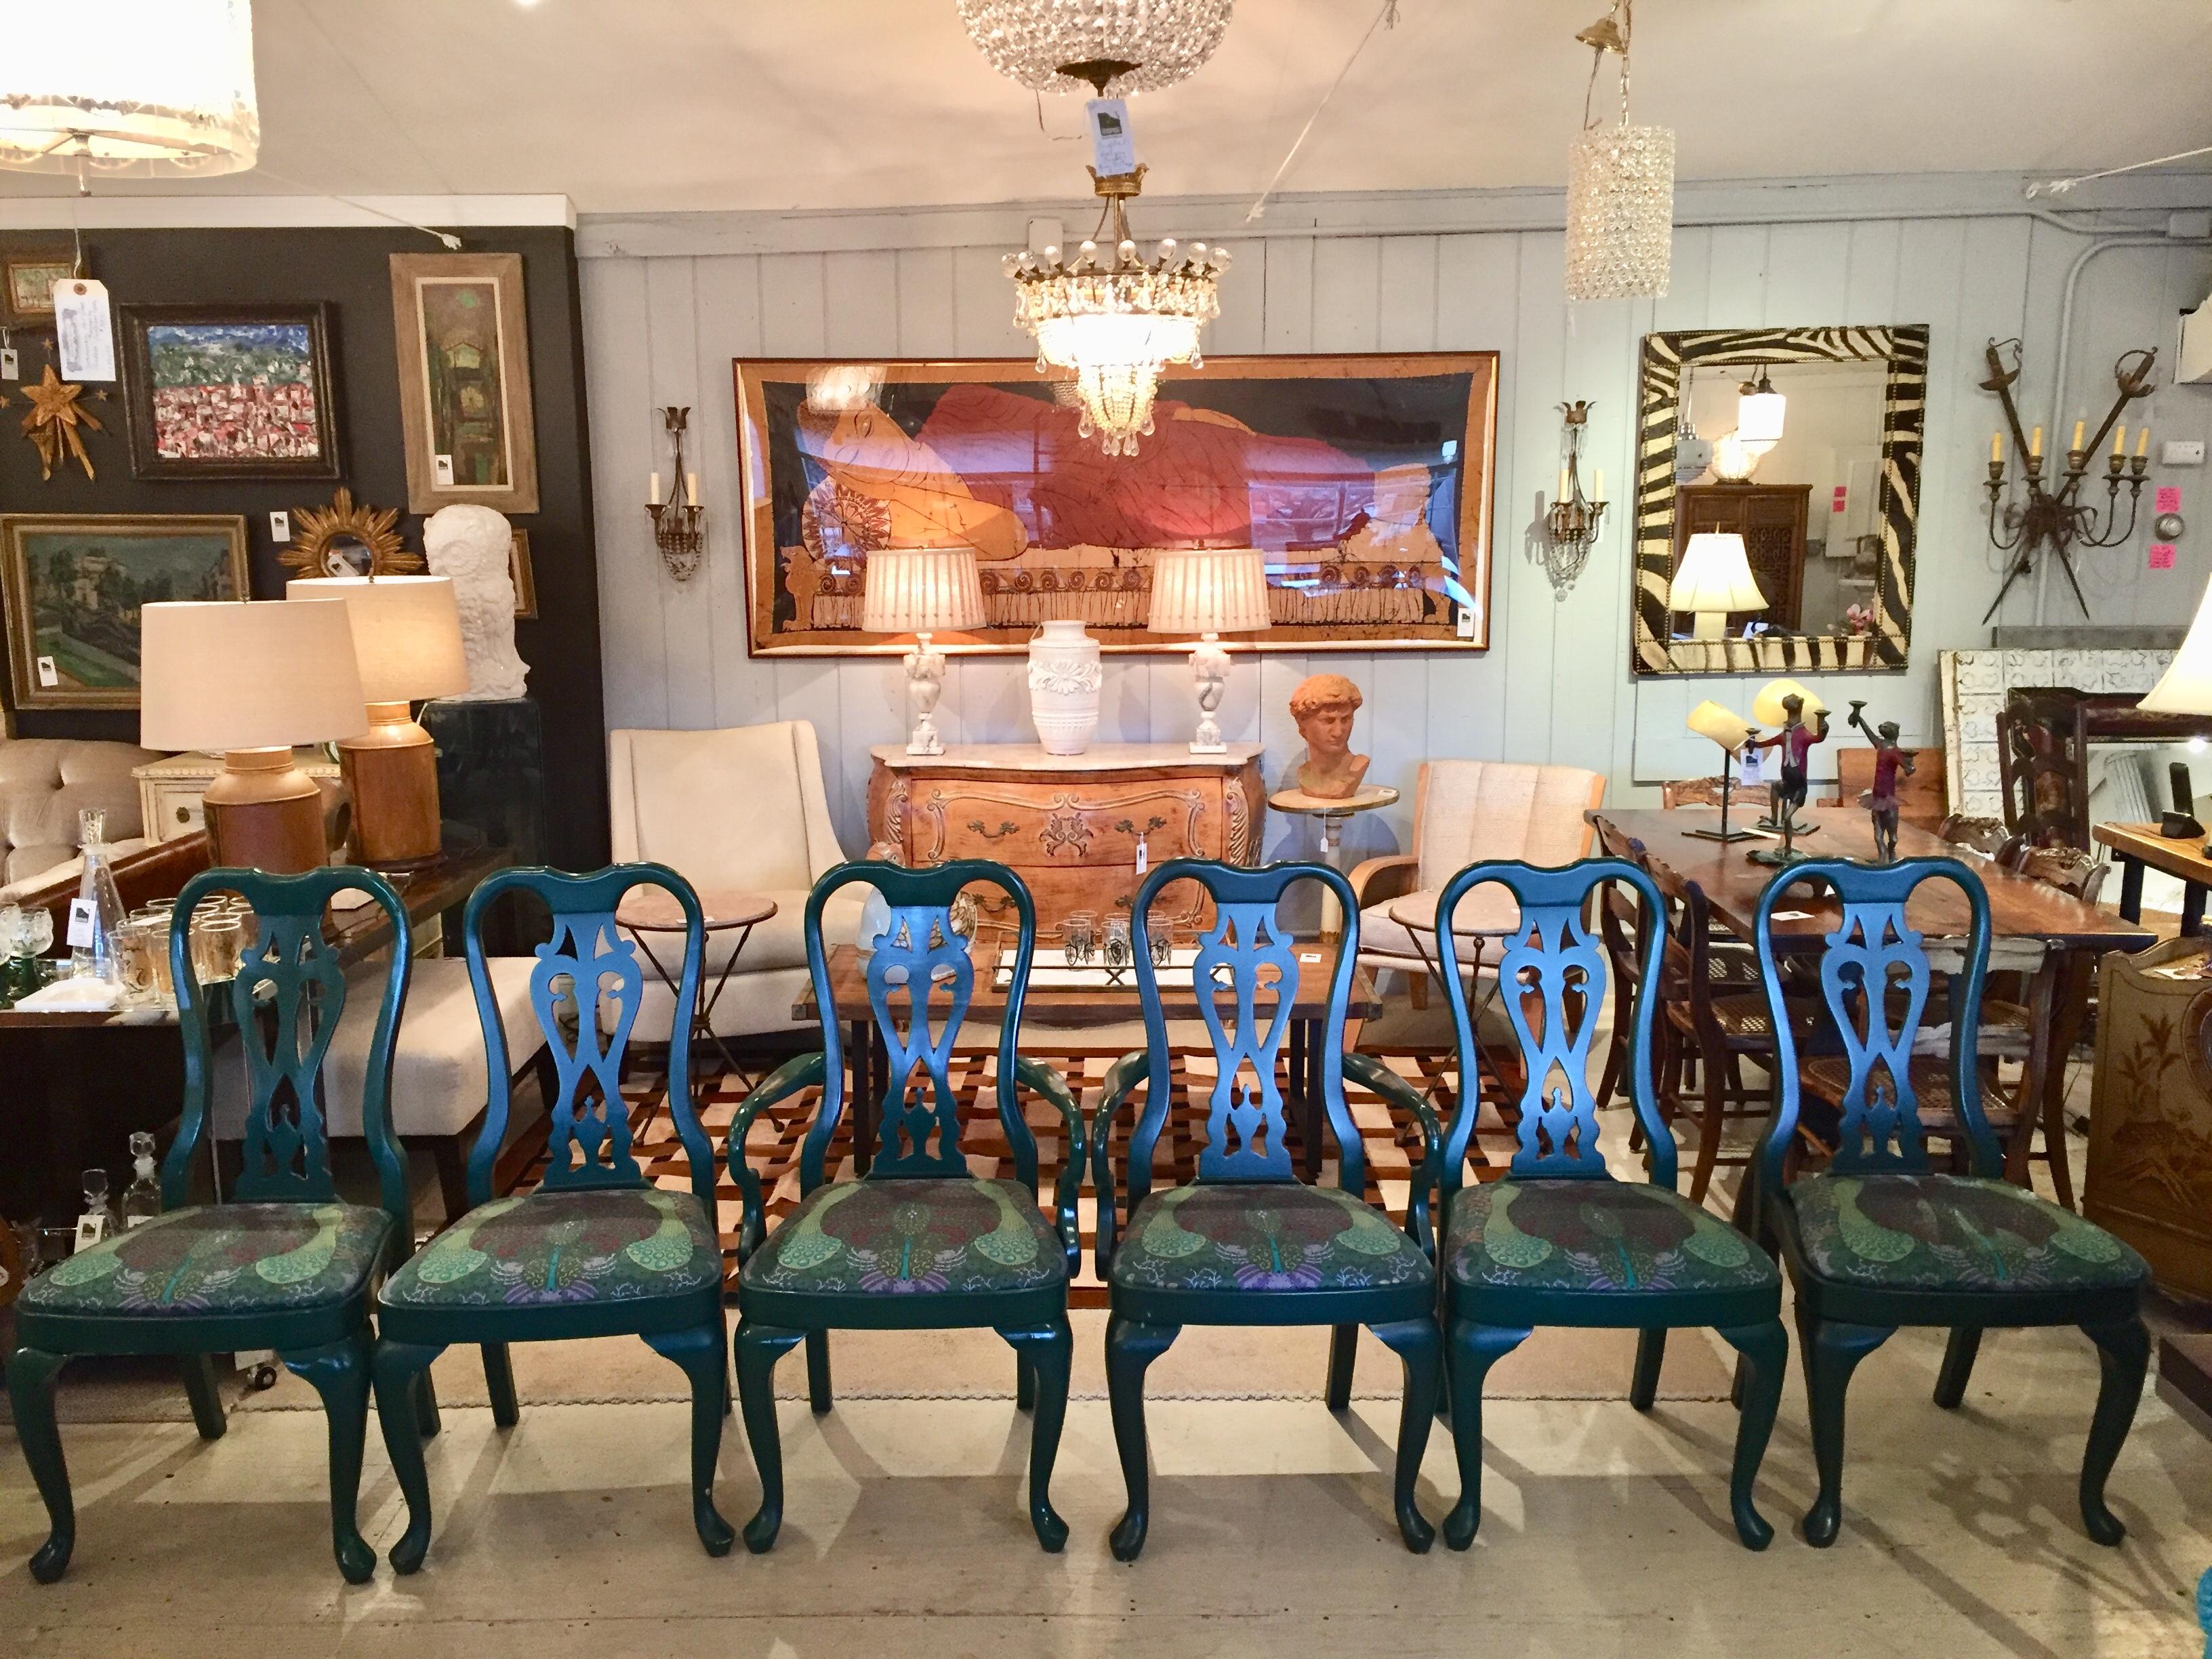 Stylish set of painted Ralph Lauren style dining chairs in a beautiful dark turquoise, having paisley upholstered seats. Measures: 4 side, 2 armchairs.

Measures: Armchair width 22 1/4
Side chair width 21.